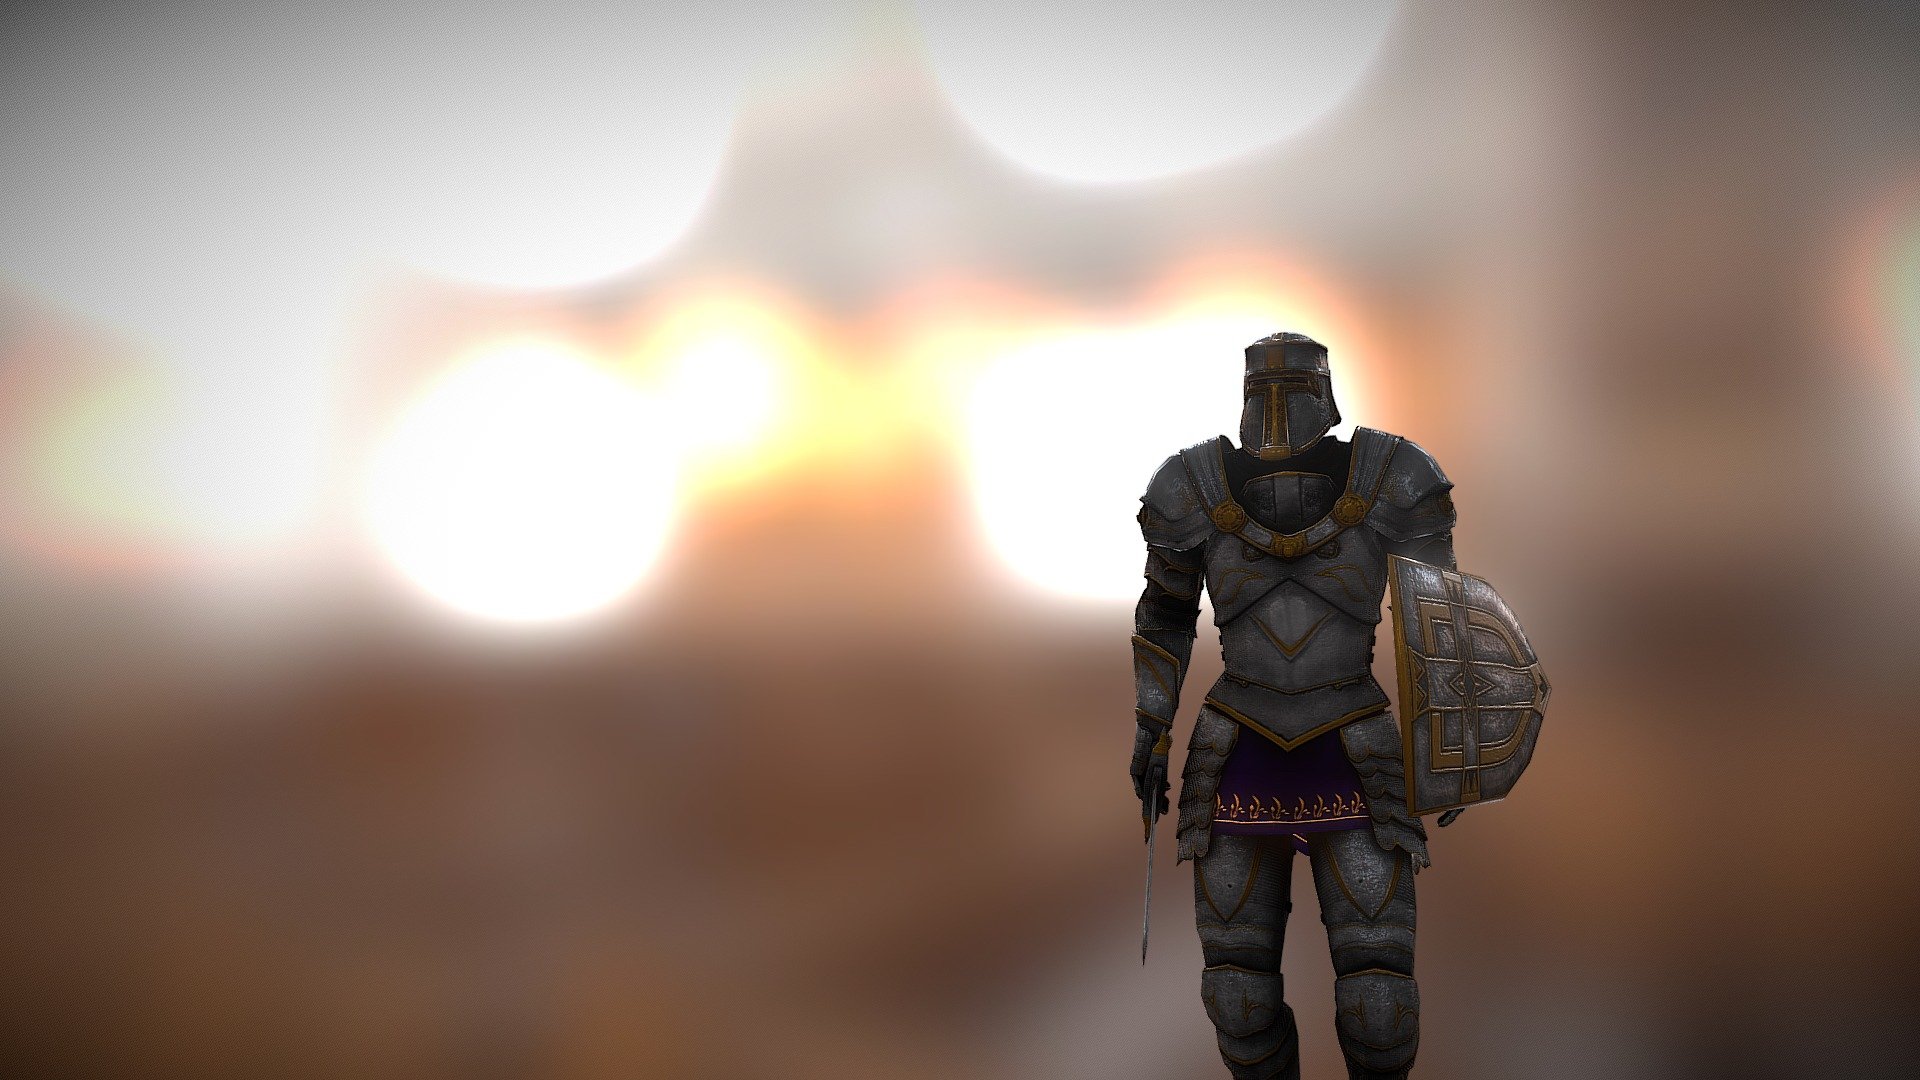 Just a small test of armored knight walking :)

Cheers! - Knight walking test - 3D model by SRFstudio 3d model